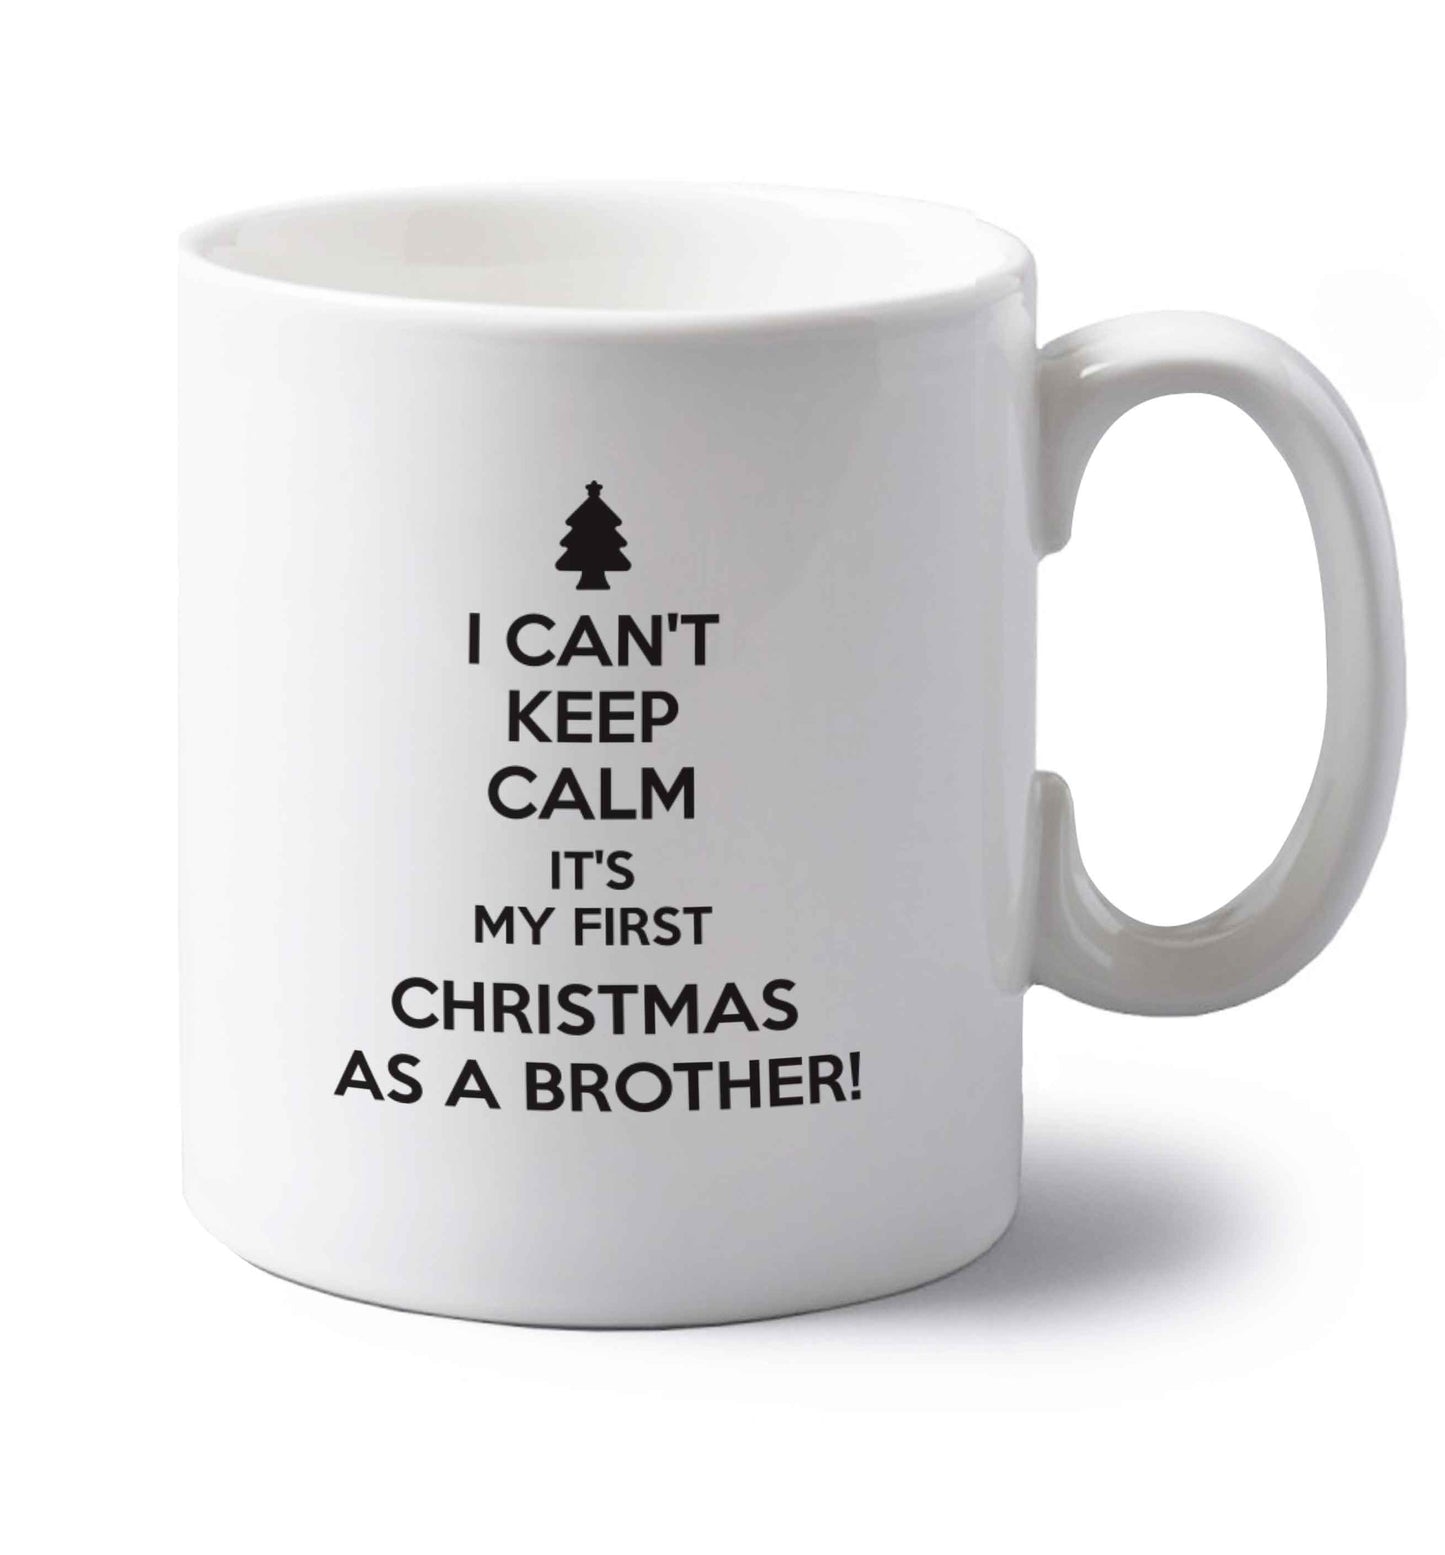 I can't keep calm it's my first Christmas as a brother! left handed white ceramic mug 